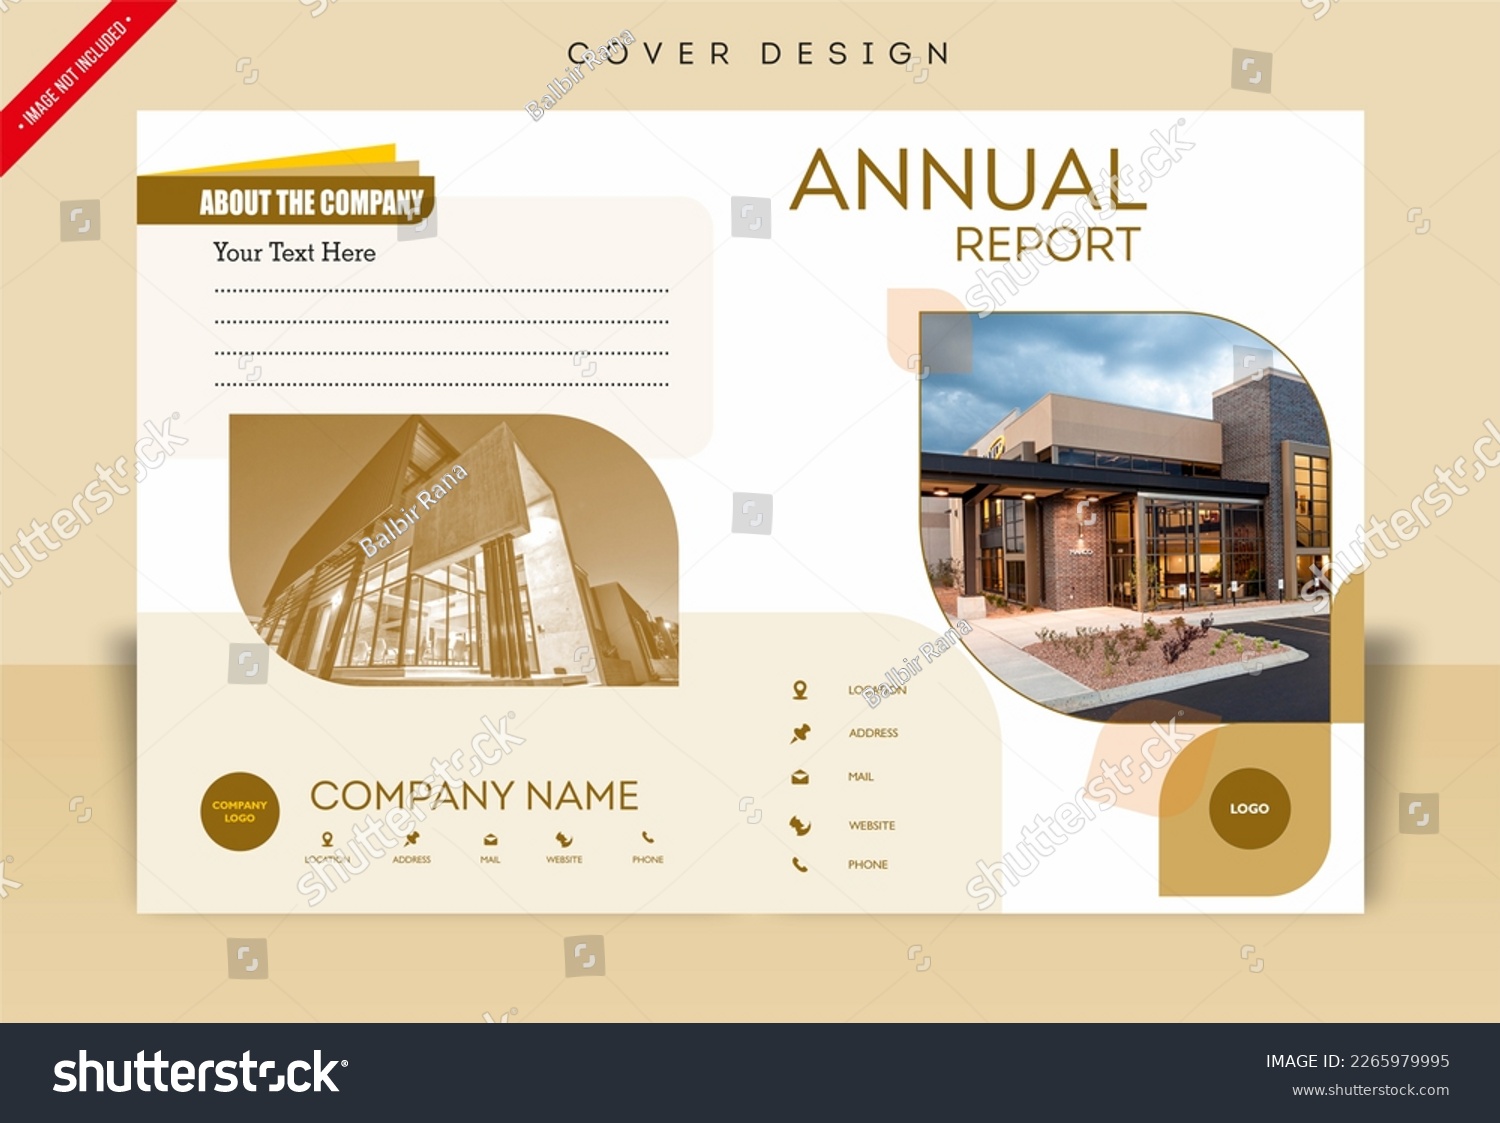 ANNUAL REPORT COVER DESIGN FOR BUSINESS #2265979995